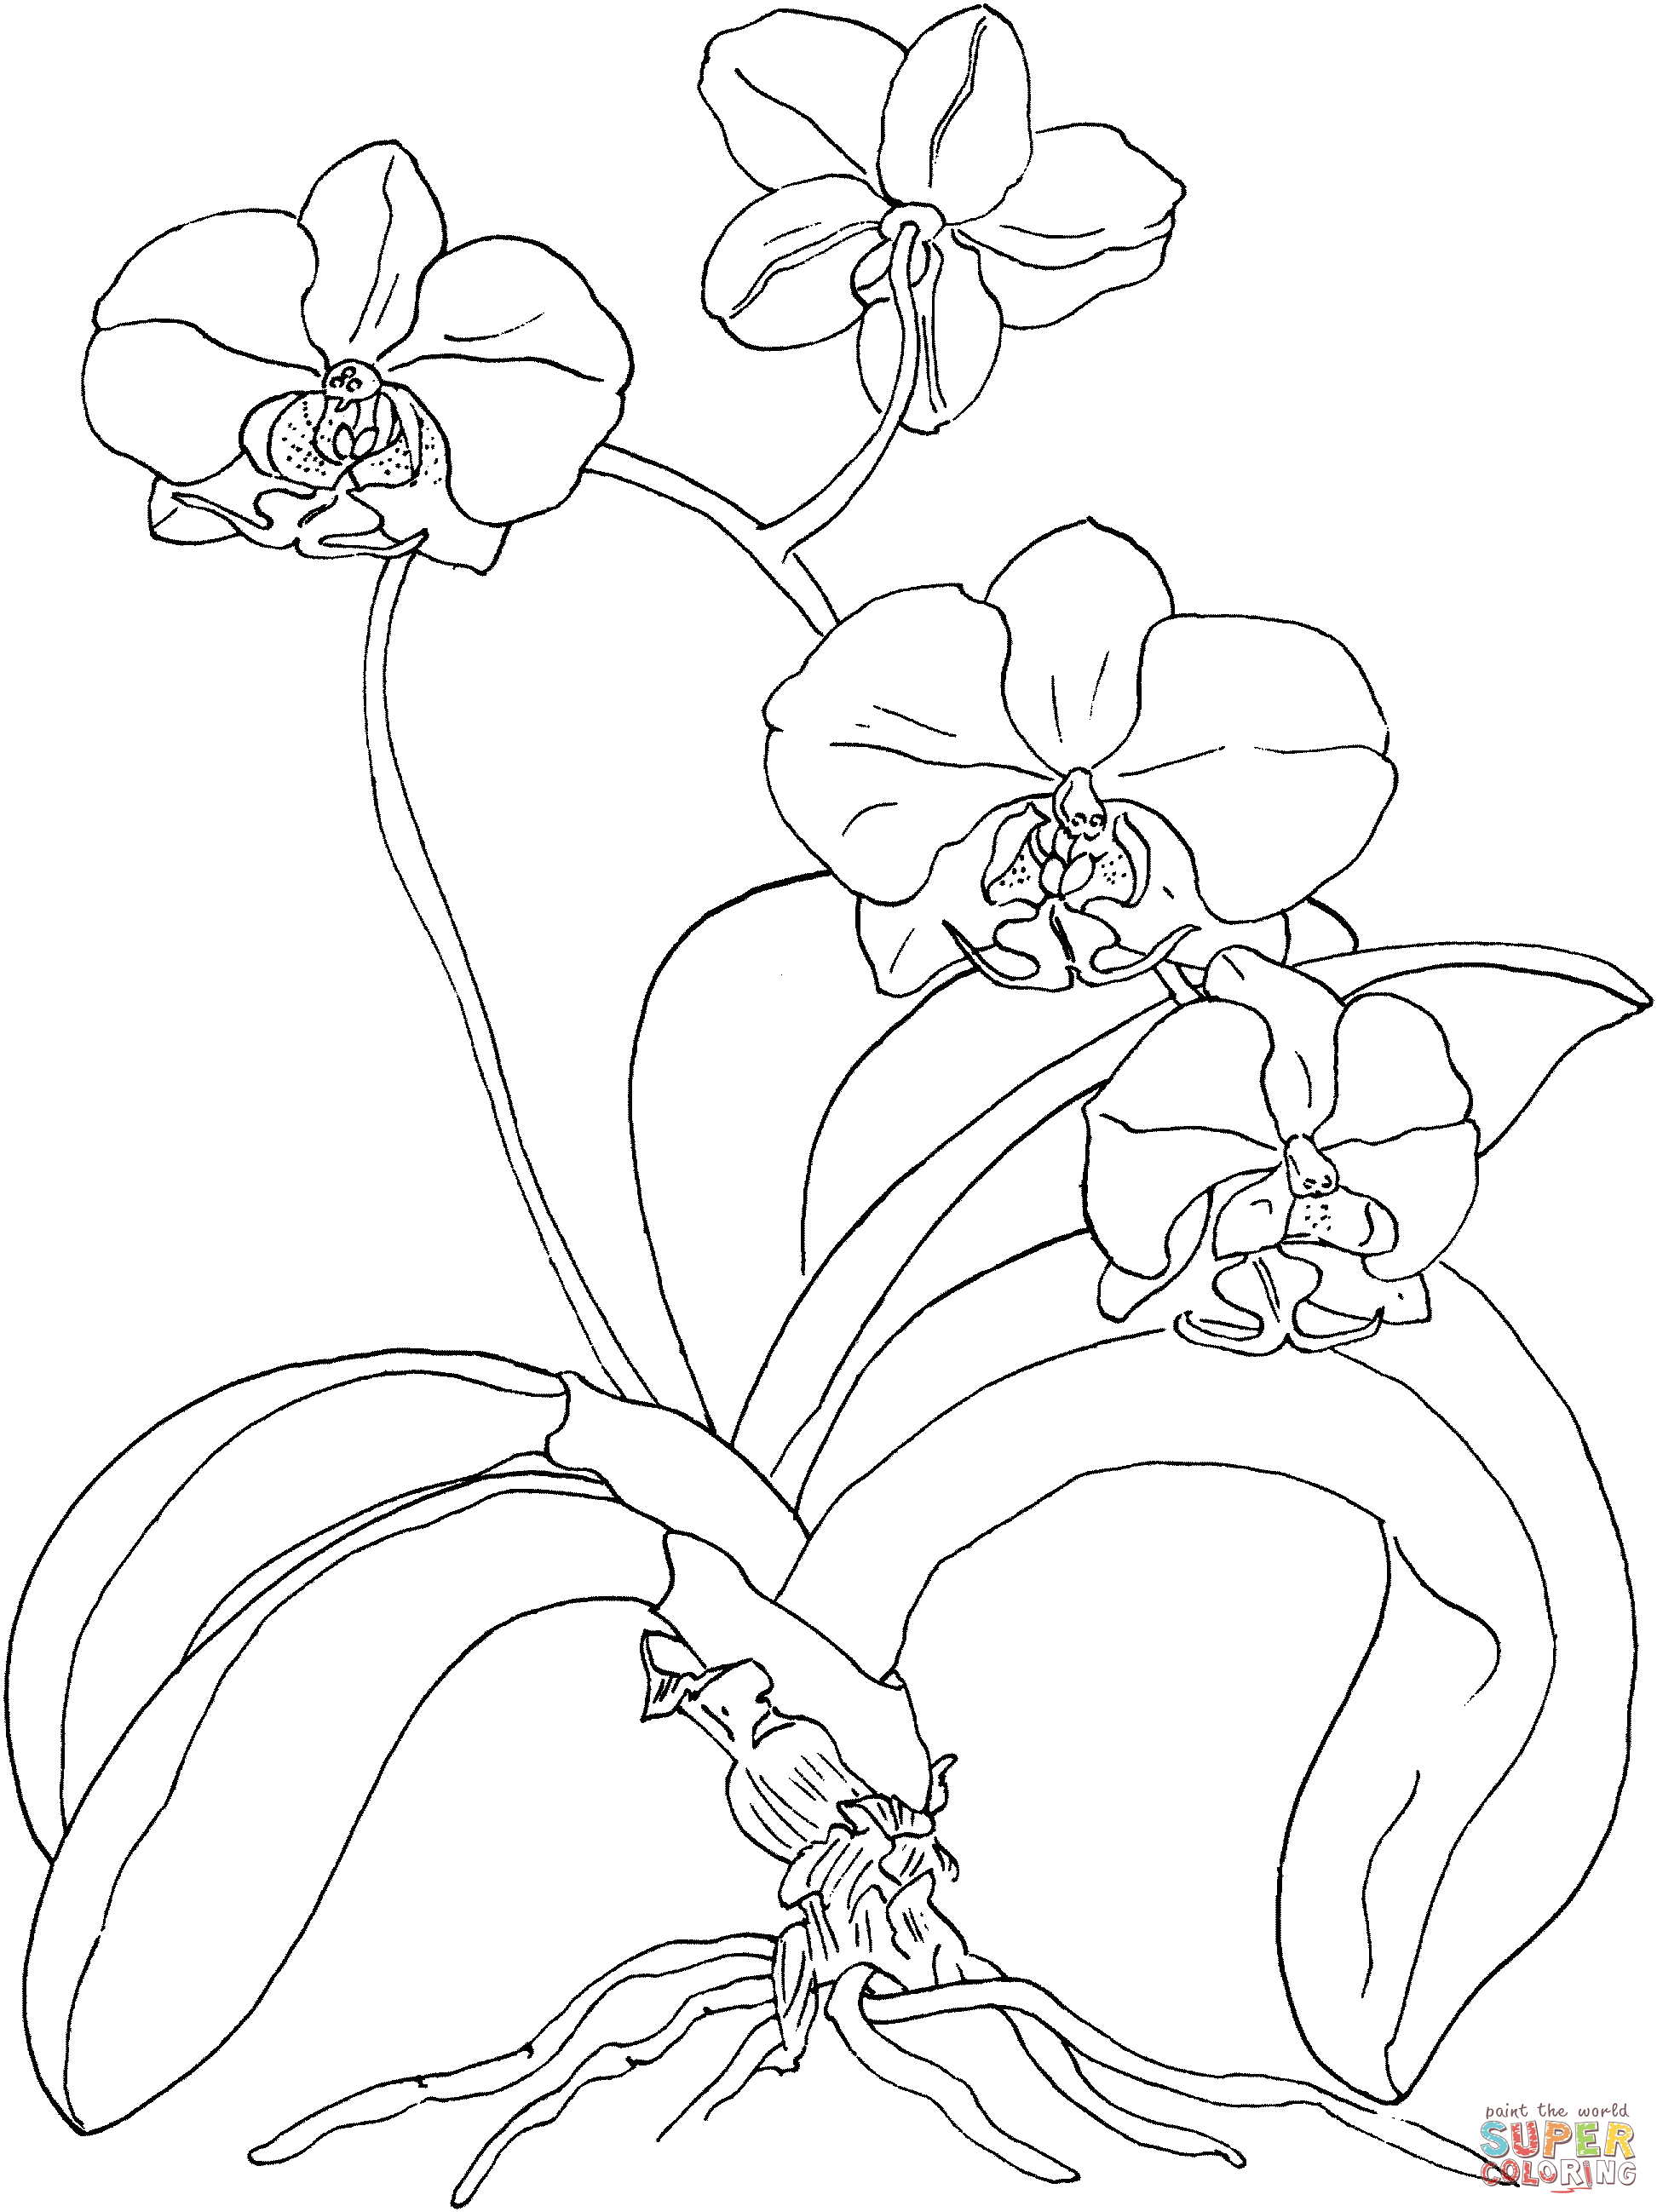 Phalaenopsis or Moth Orchid Coloring Pages - Orchid Coloring Pages -  Páginas para colorear para niños y adultos